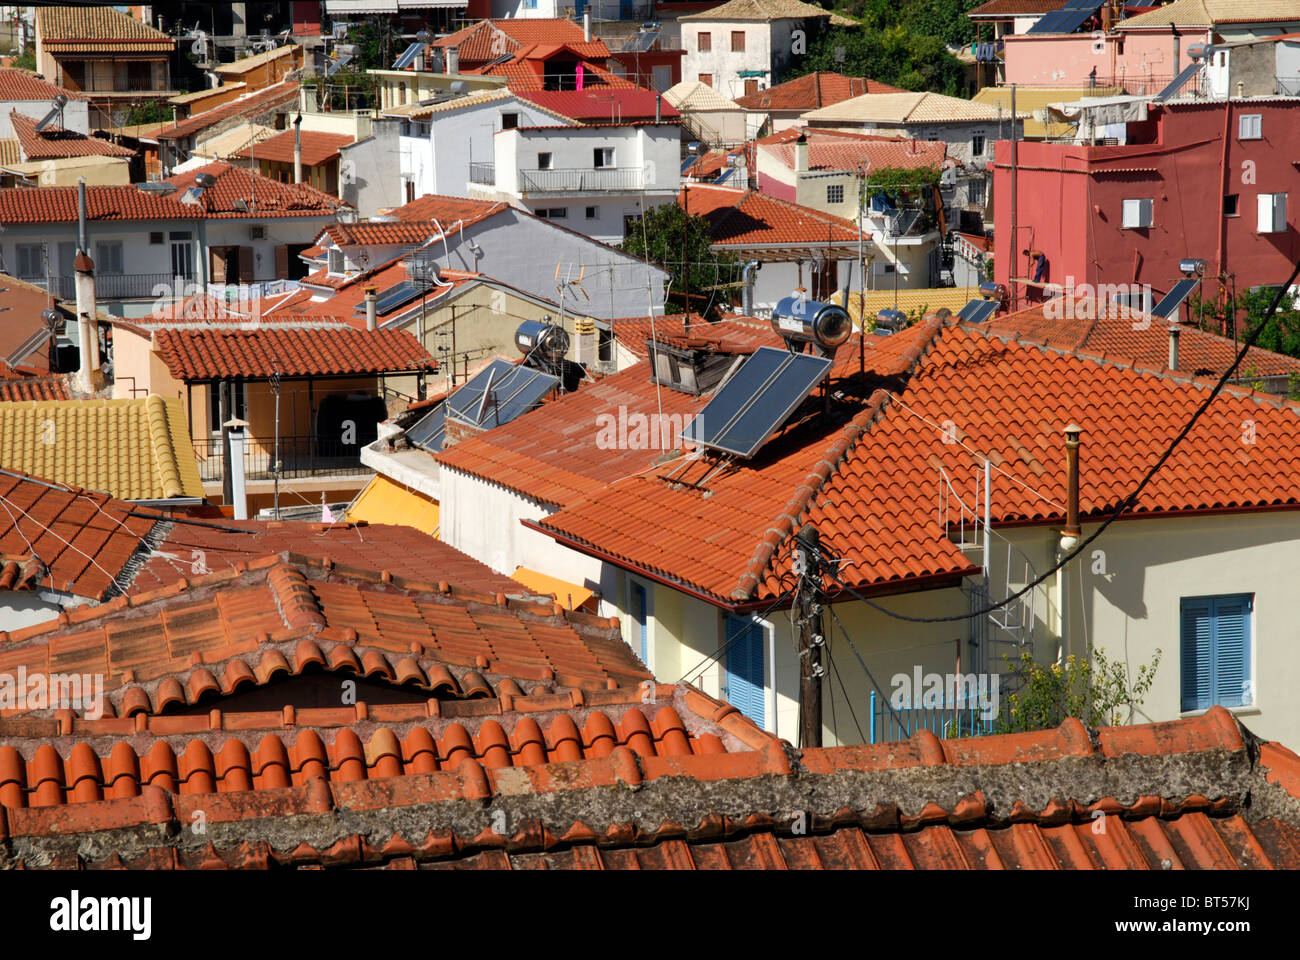 Solar Water Heating Panels on the Roofs of Houses in Parga, Epirus Greece. Stock Photo